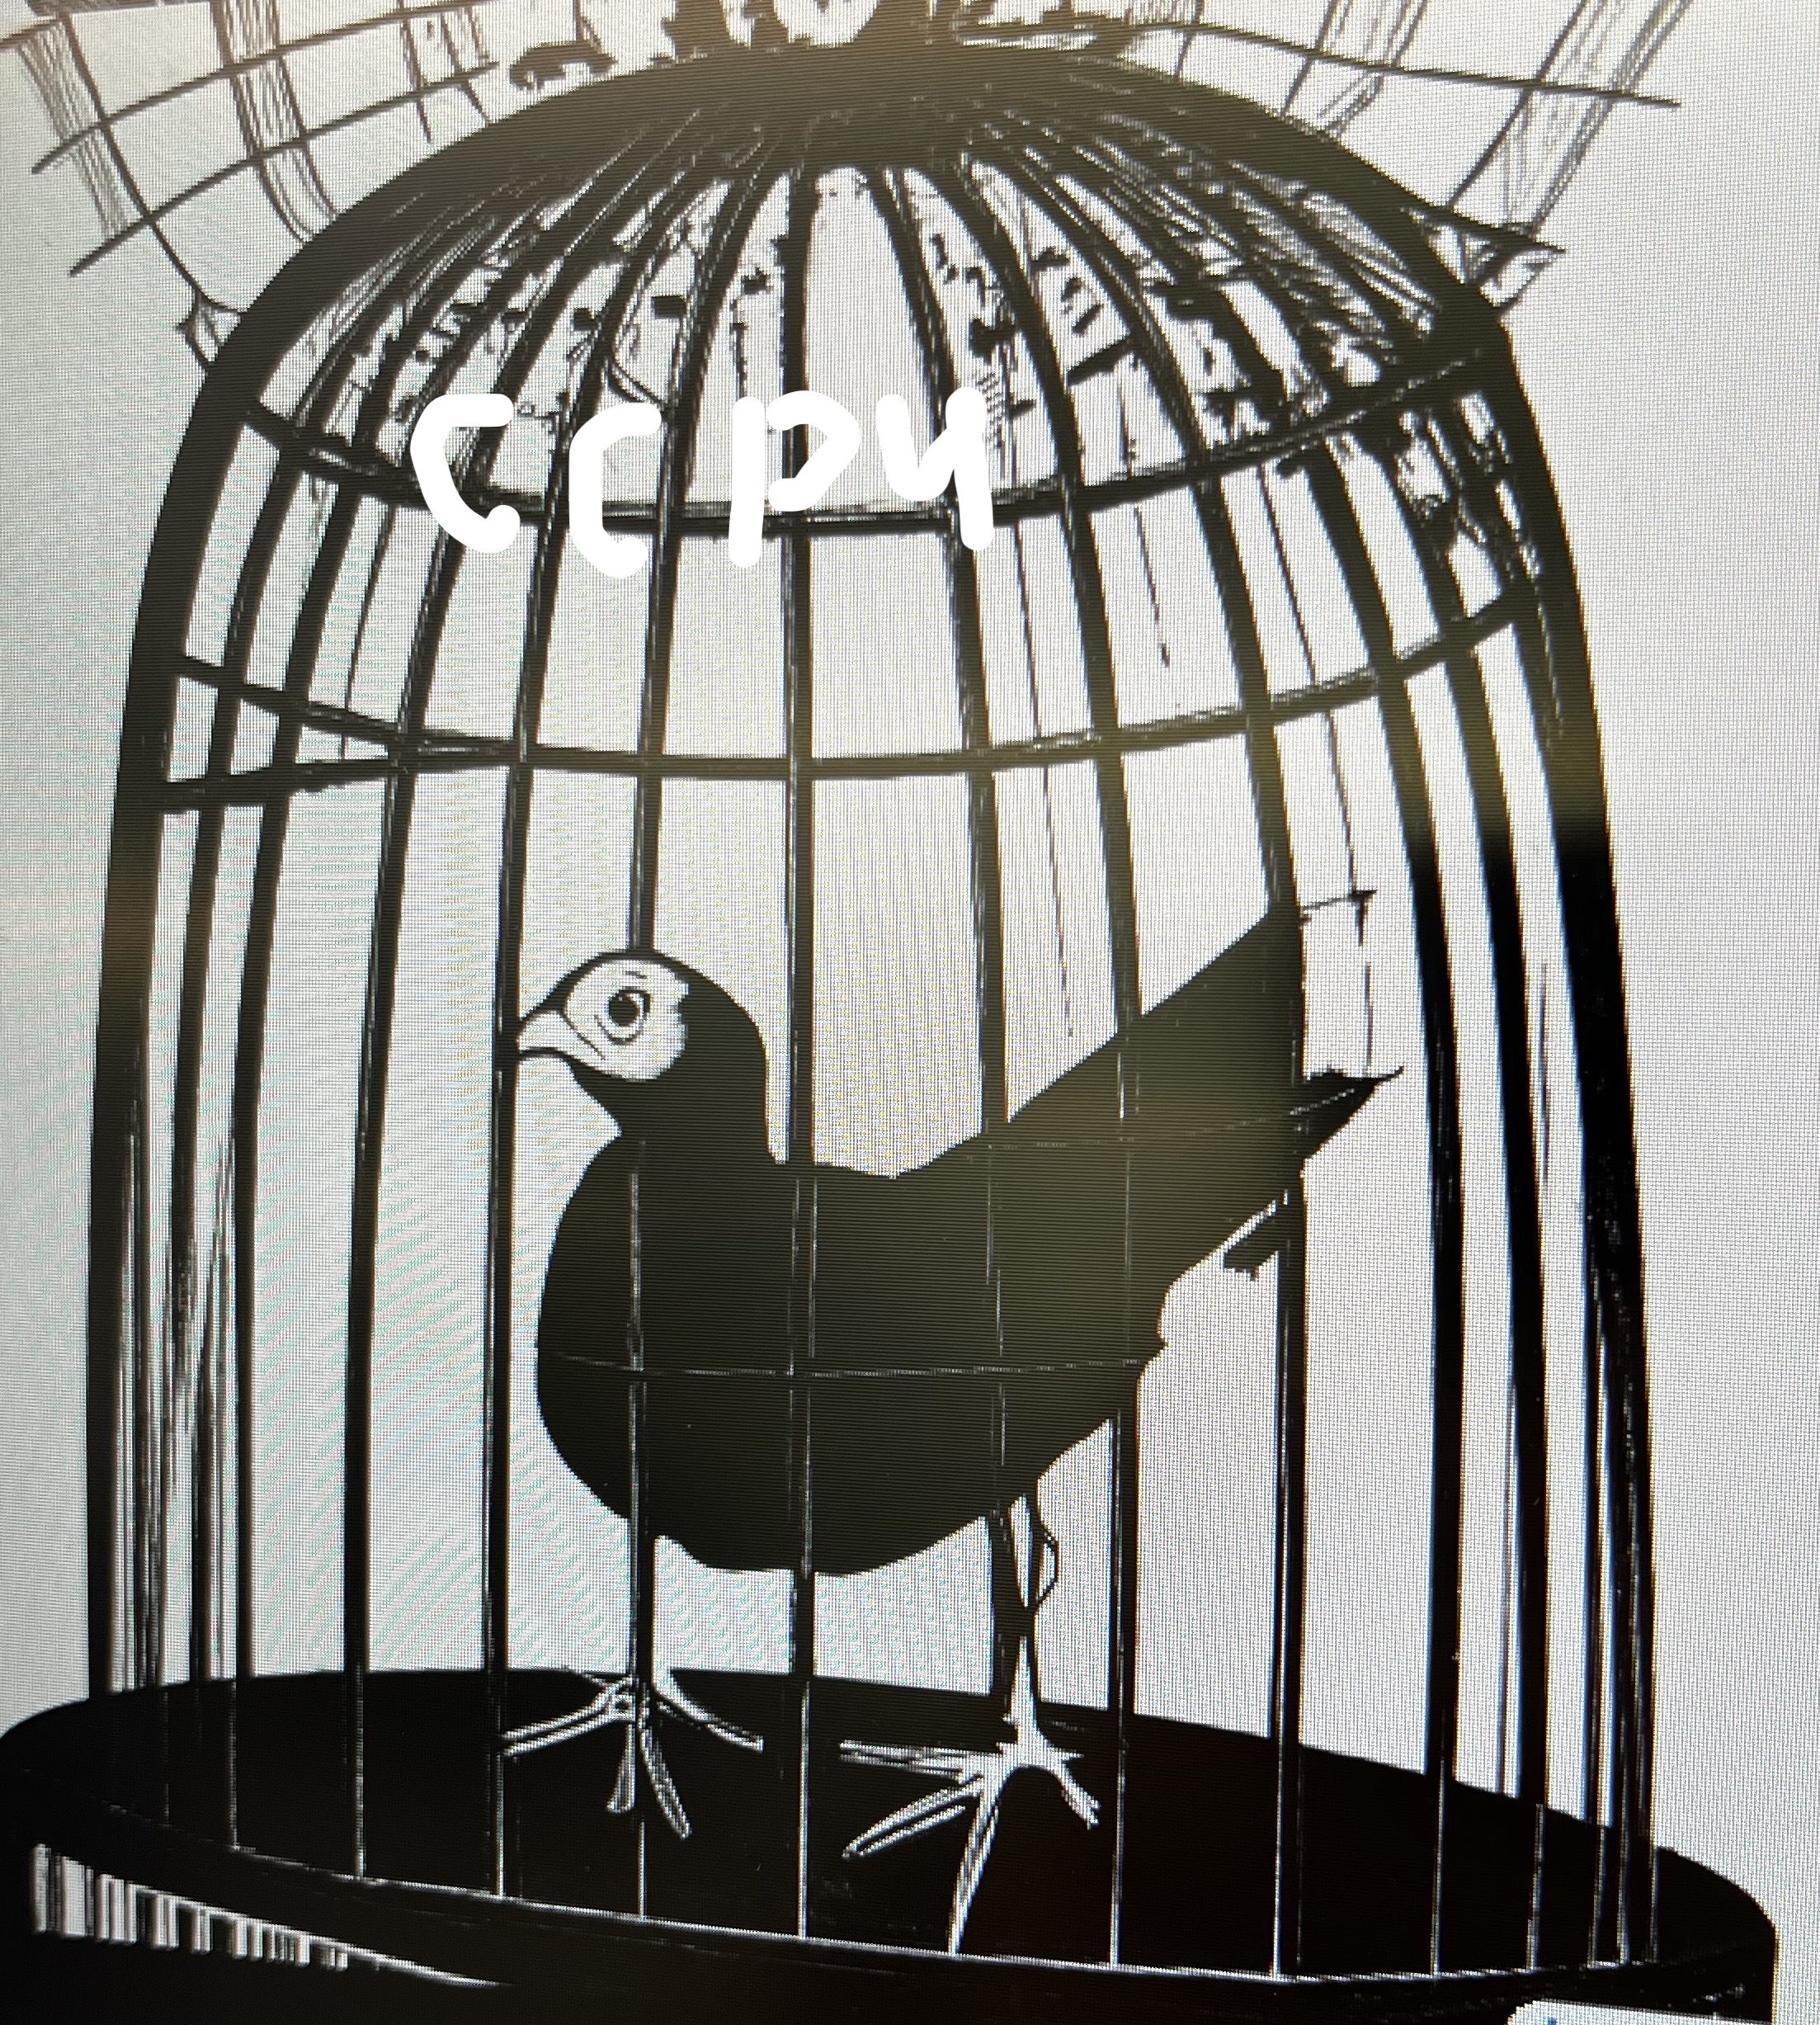 Coot in a Cage (as seen by CCP4)